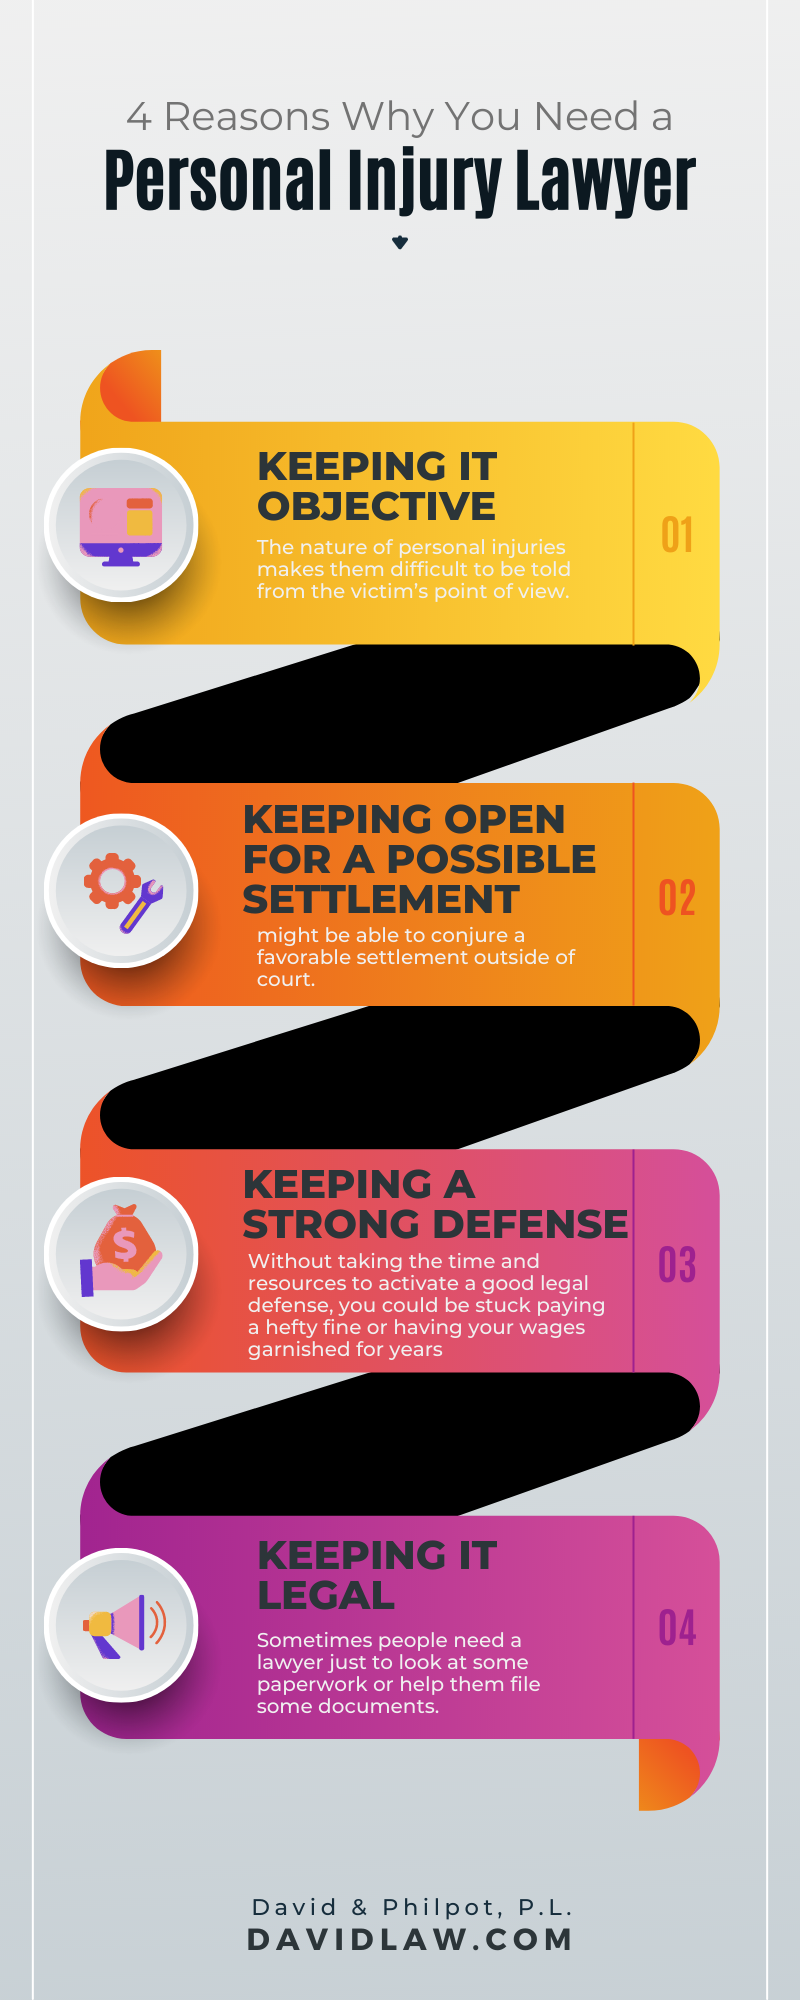 4 Reasons Why You Need a Personal Injury Lawyer Infographic